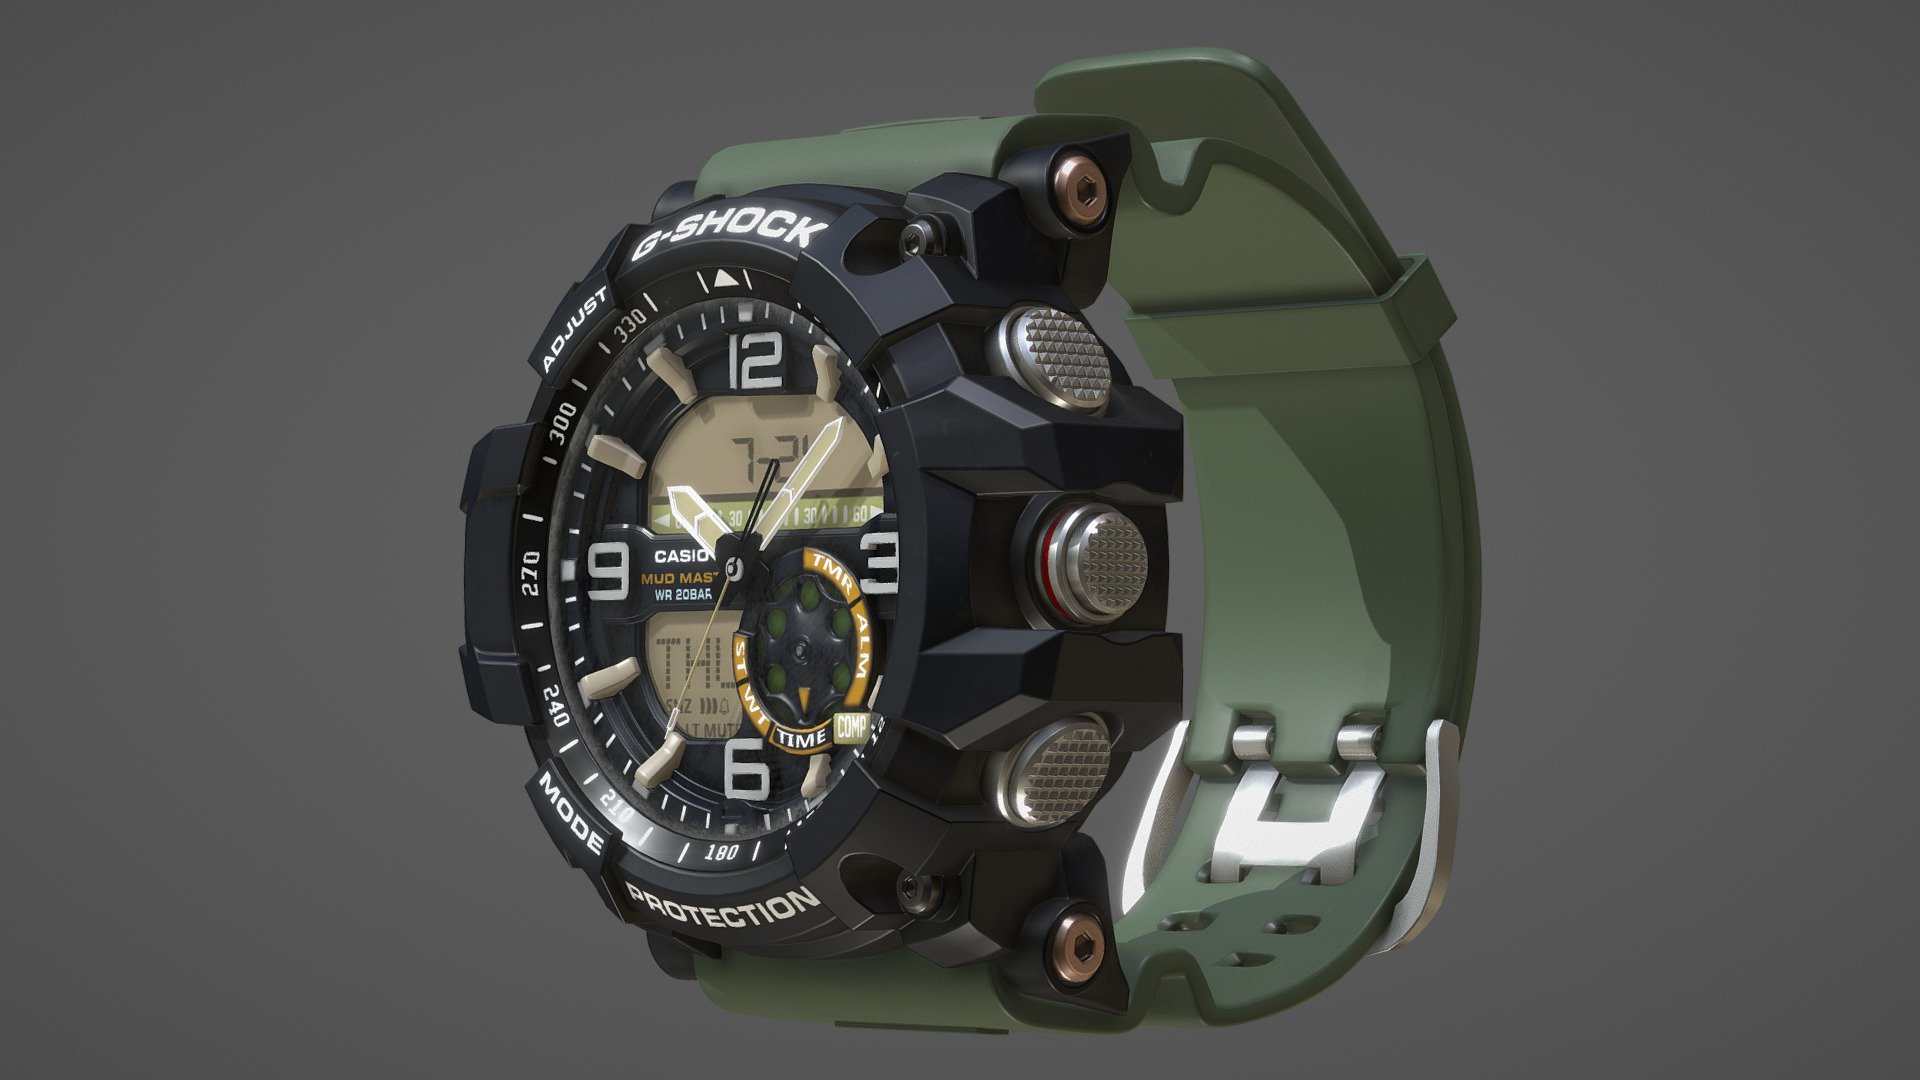 Find the final result and more renders on my Artstation: https://www.artstation.com/artwork/ZagL6X

This 3D model of G-SHOCK GG-1000-1a3 is one of the primary elements in my latest project, which I made in Blender. The textures are 4k and initially made in Substance Painter.

Check out my Twitter account for downloading 4K outputs and my future projects: https://twitter.com/EchoEmerano - G-Shock GG-1000-1a3 watch highpoly model - 3D model by Echo Emerano (@Emerano) 3d model